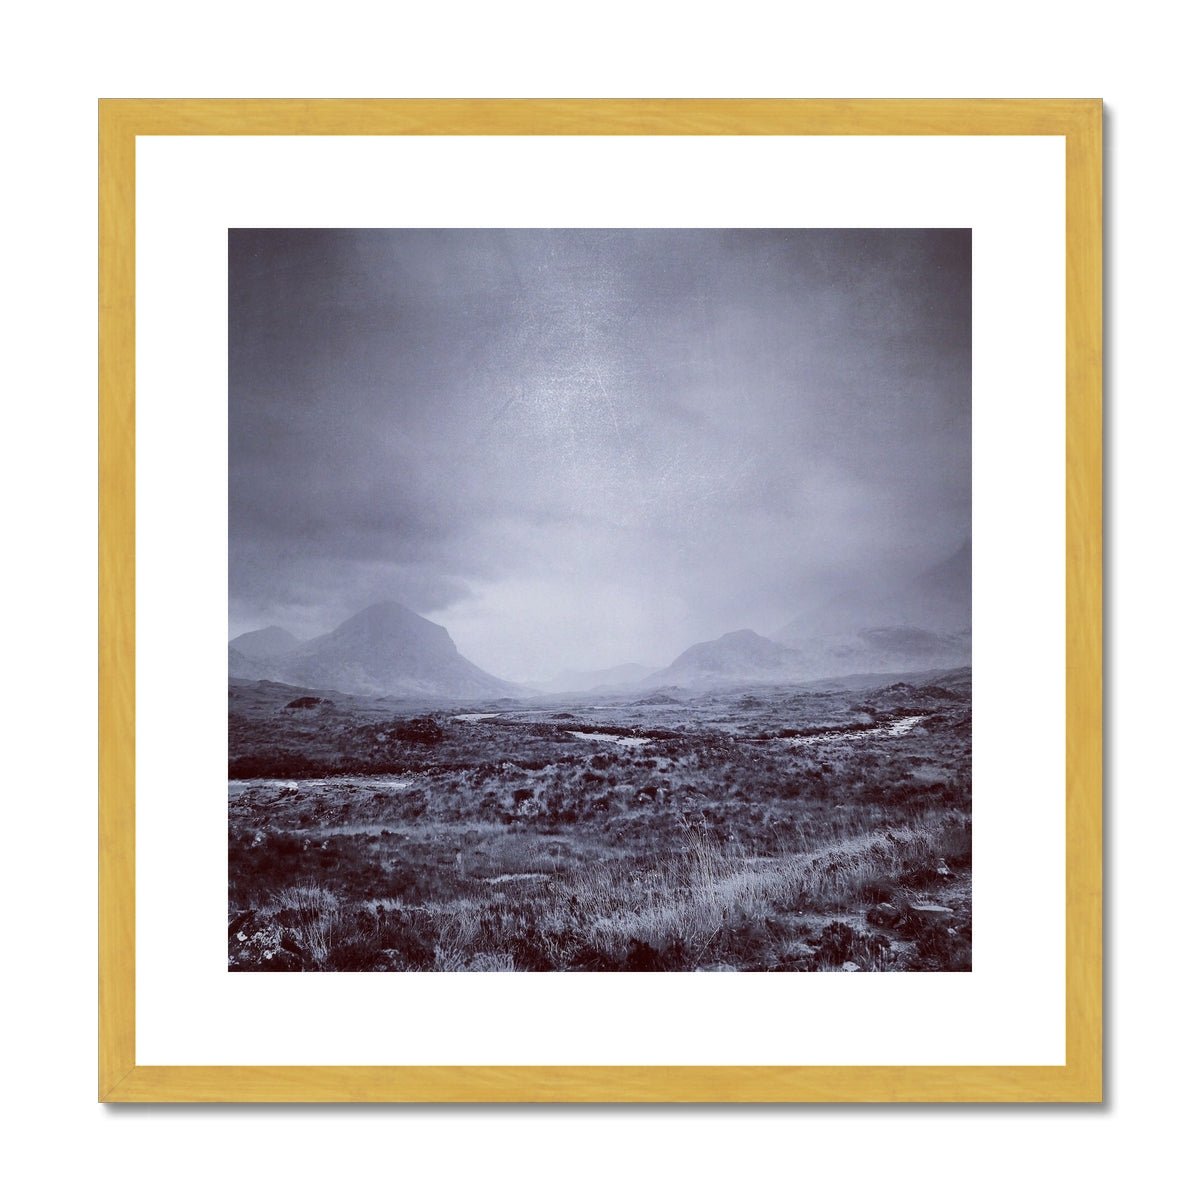 The Brooding Cuillin Skye Painting | Antique Framed & Mounted Prints From Scotland-Antique Framed & Mounted Prints-Skye Art Gallery-20"x20"-Gold Frame-Paintings, Prints, Homeware, Art Gifts From Scotland By Scottish Artist Kevin Hunter